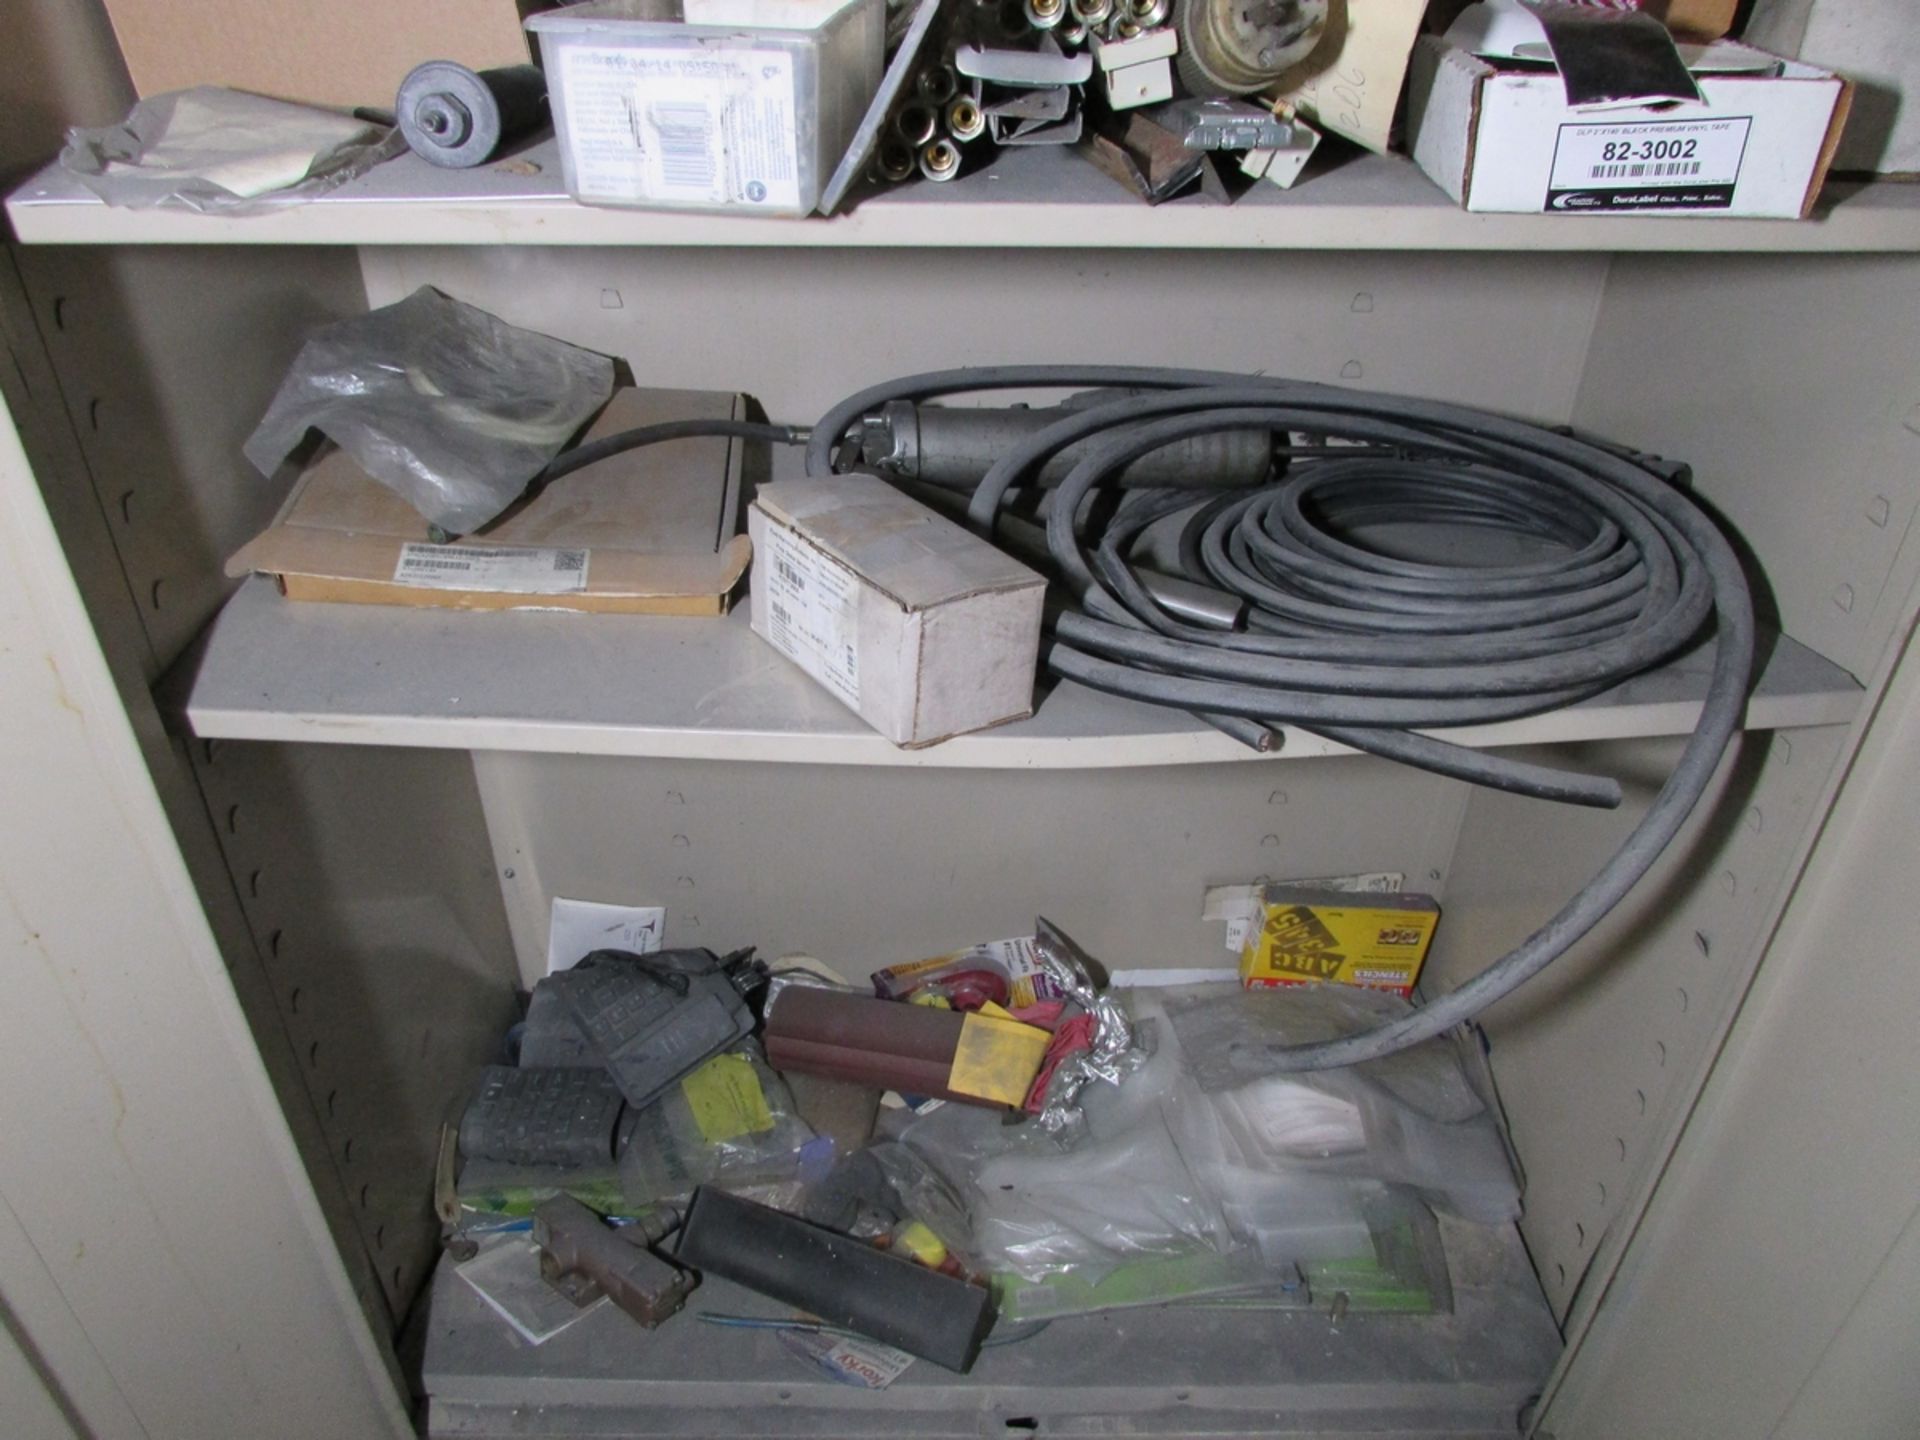 LOT - (3) 2-DOOR CABINETS, W/ CONTENTS: ASSORTED PARTS, FUSES, HARDWARE, ETC. - Image 4 of 10